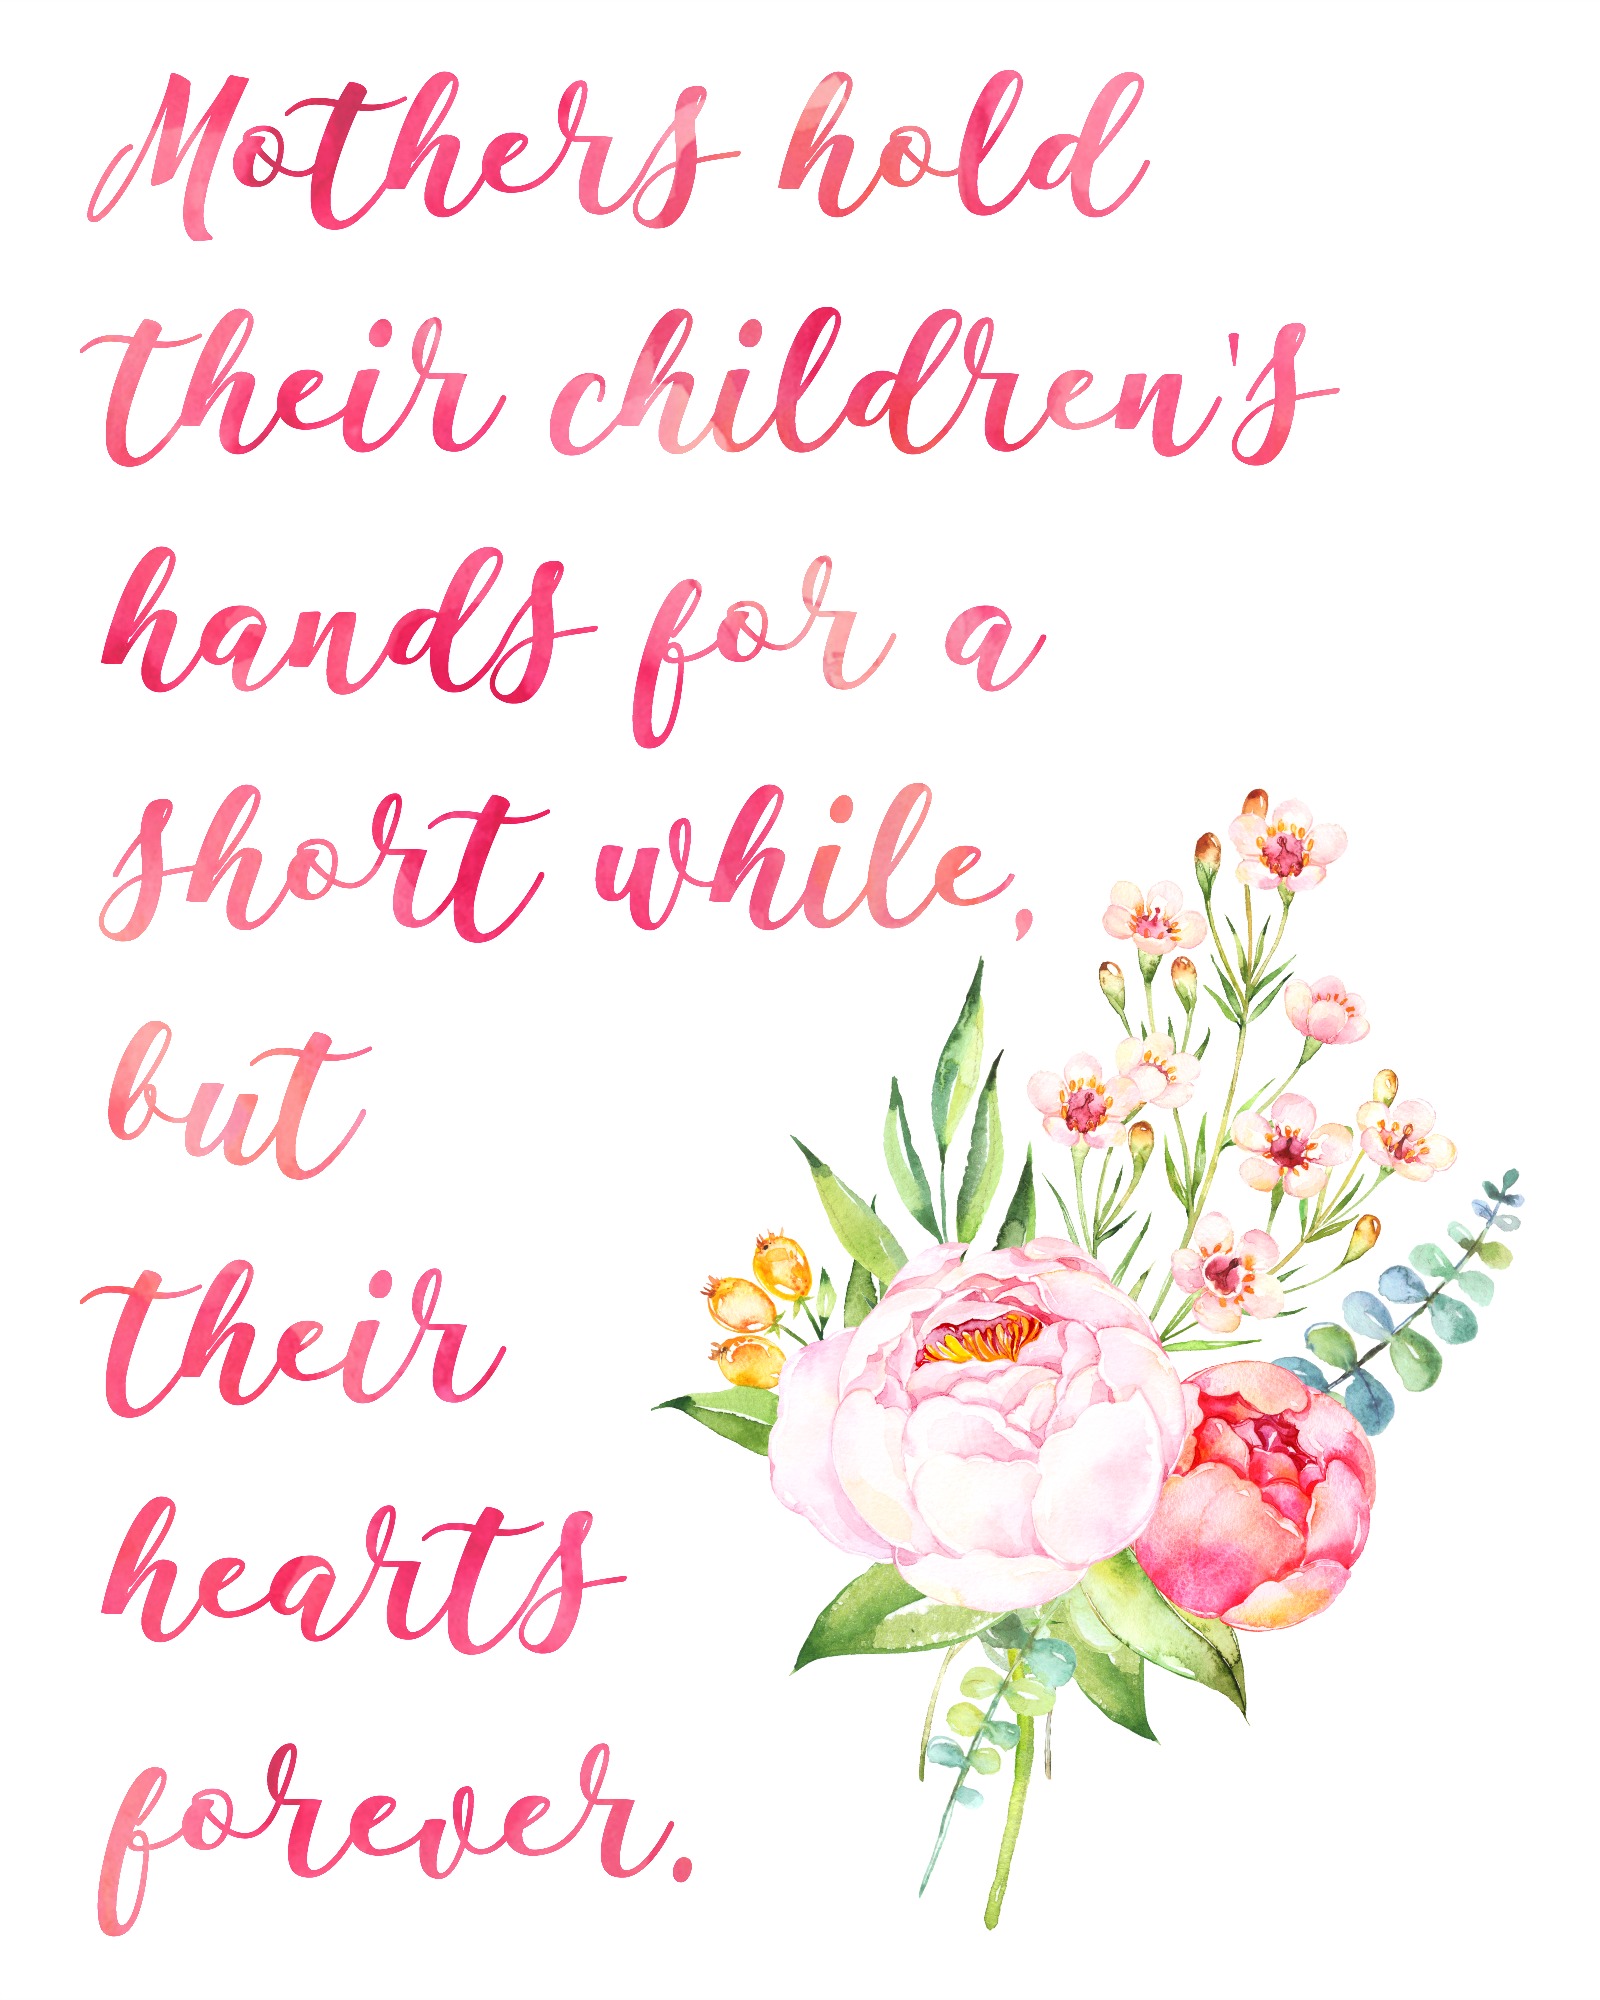 A Mother's Day quote.